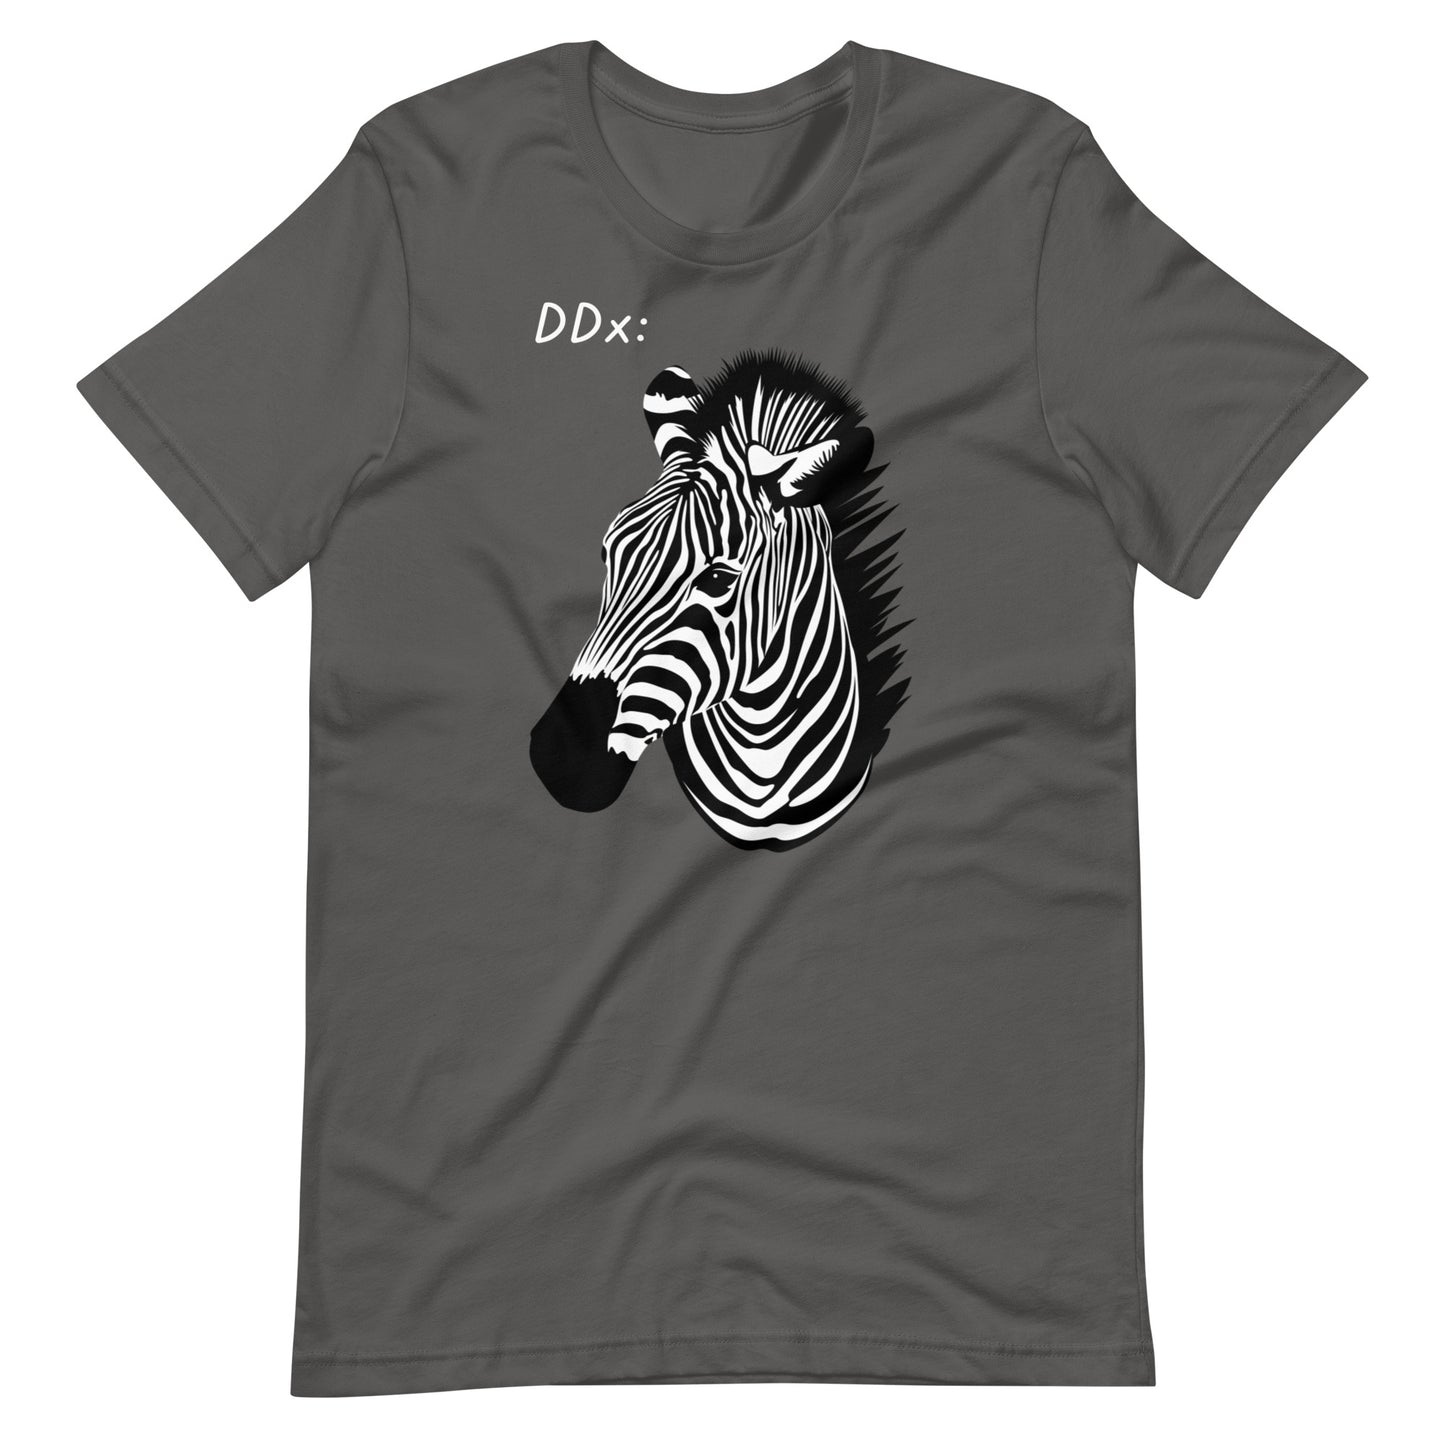 Graphic Tee, Zebra, Internal Medicine, Differential Diagnosis, Funny Doctor Shirt, Medical Student, Funny Nurse Shirt, Funny Resident Shirt, Doctor, Physician, Resident, Nurse, PA, NP, Medical Student